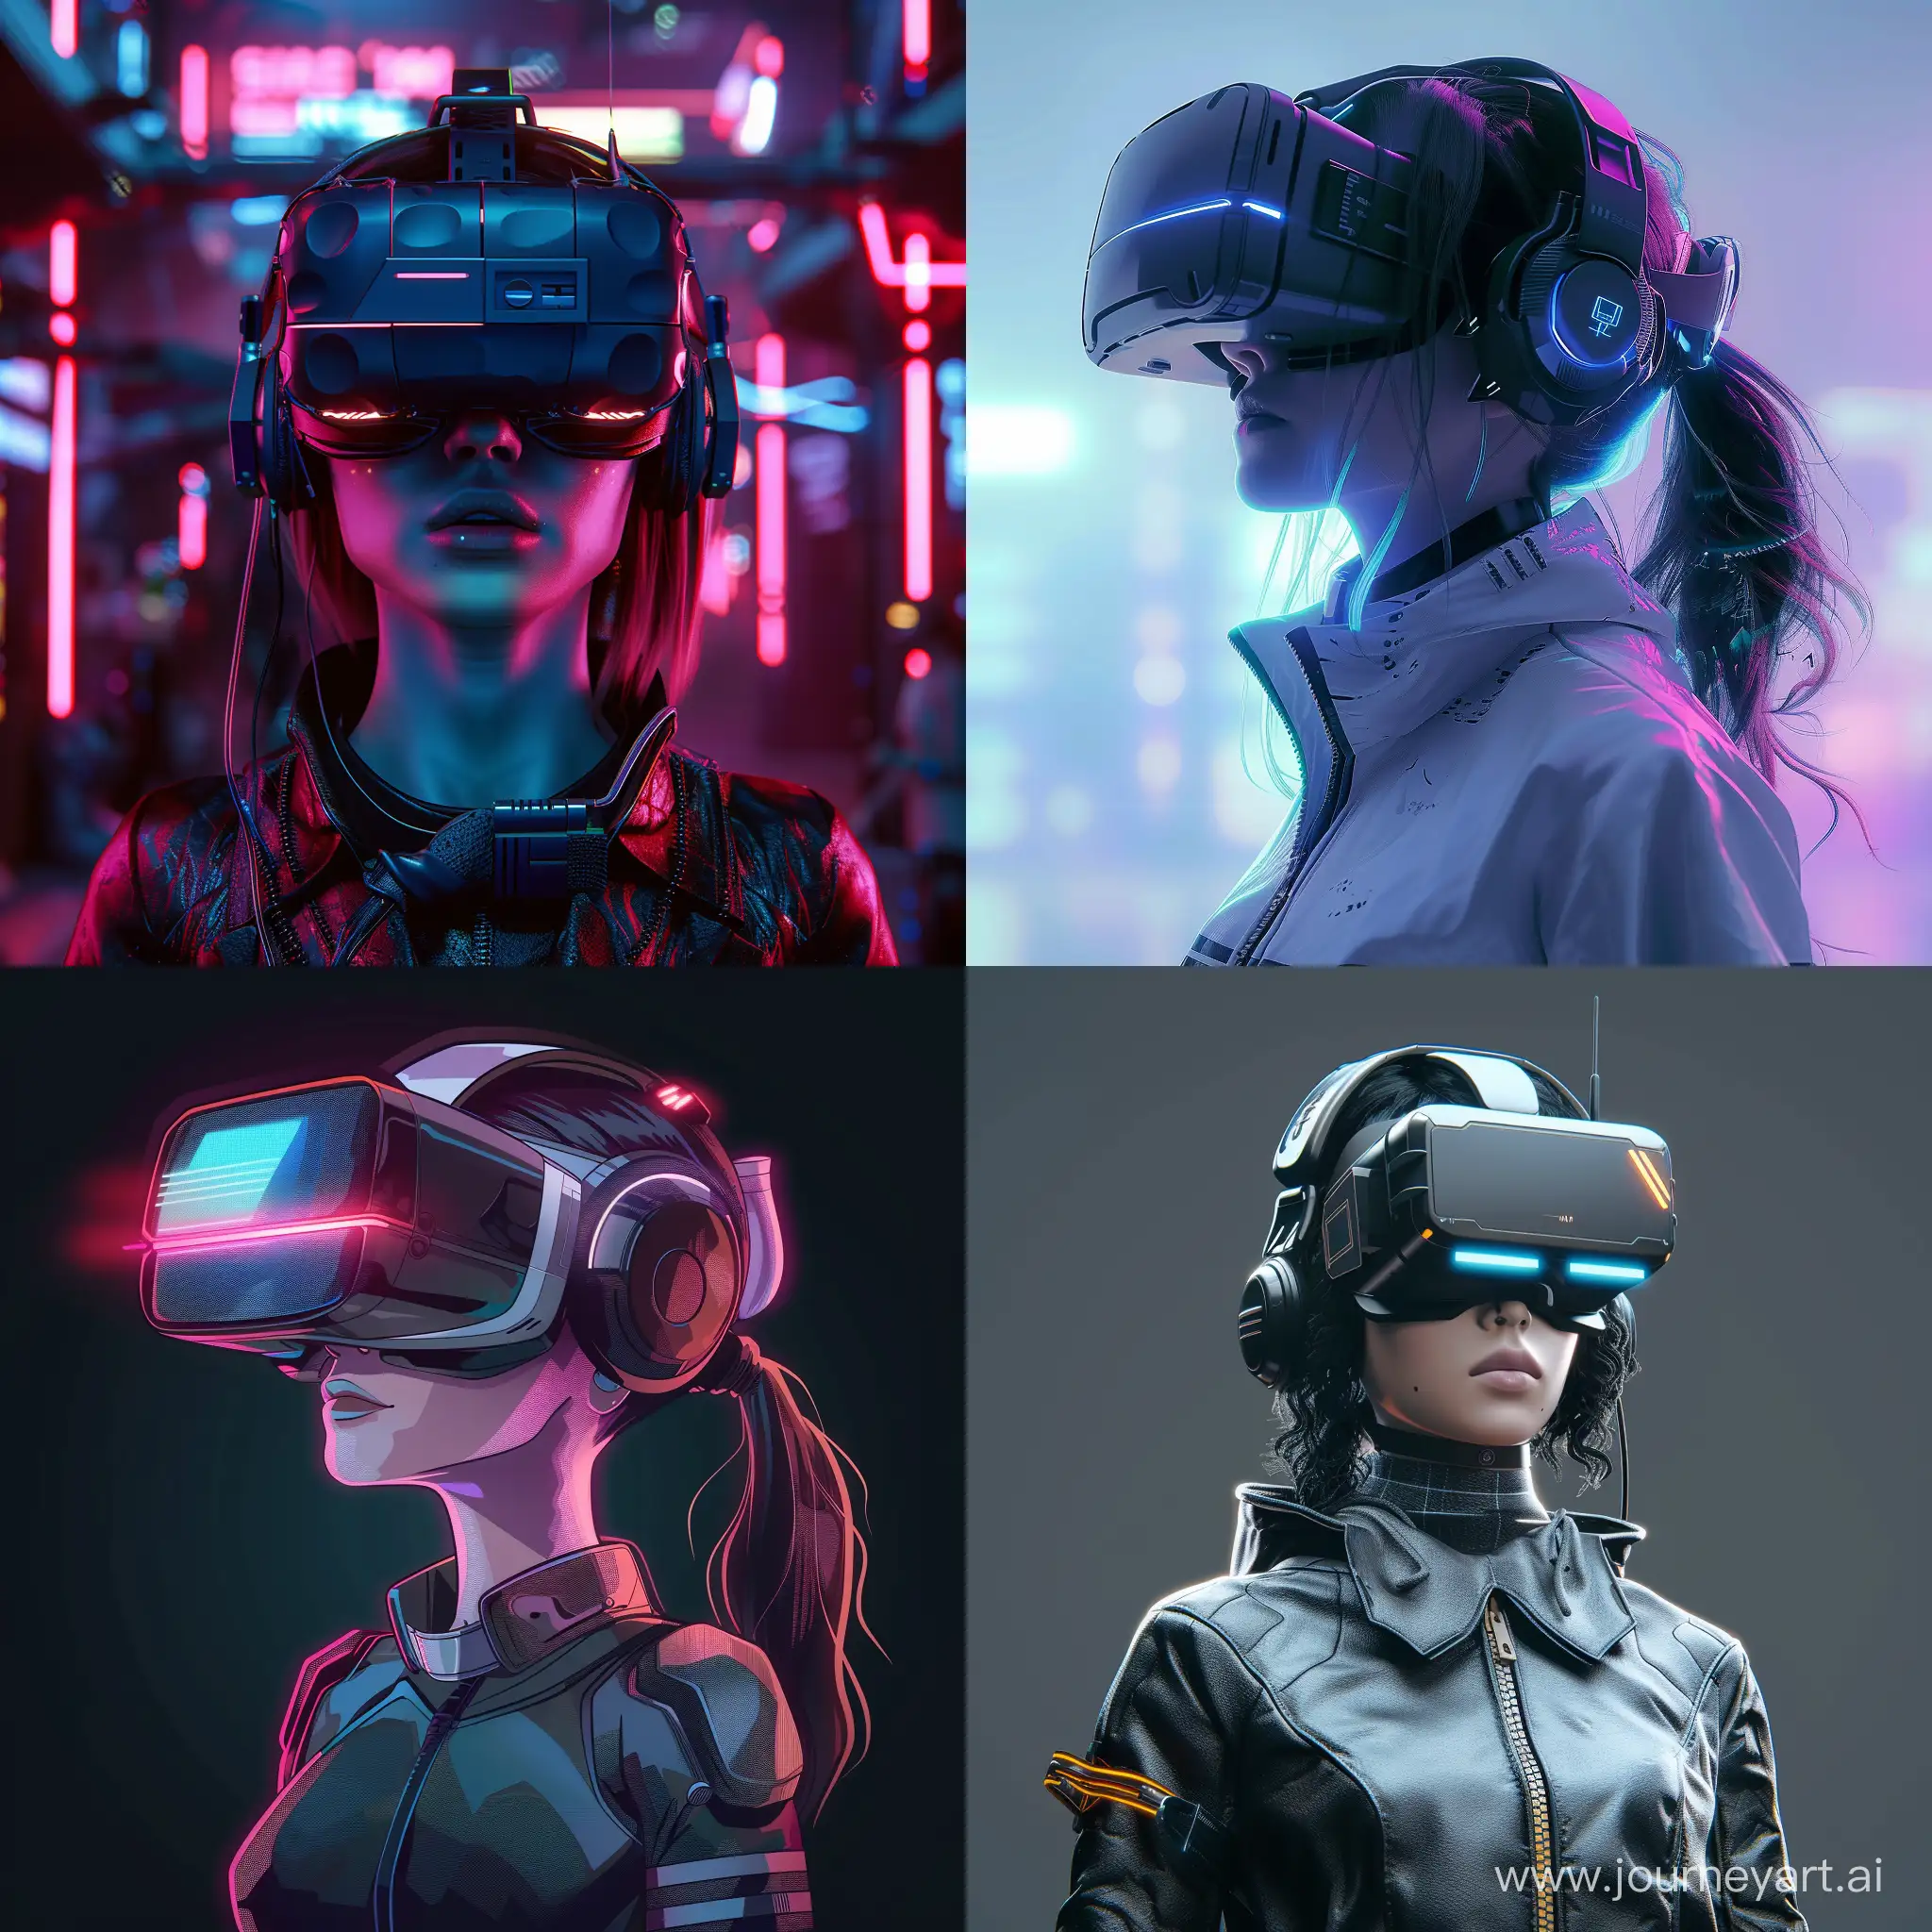 generate in image of animation girl character wearing a VR headset, cyberpunk theme, futuristic setting